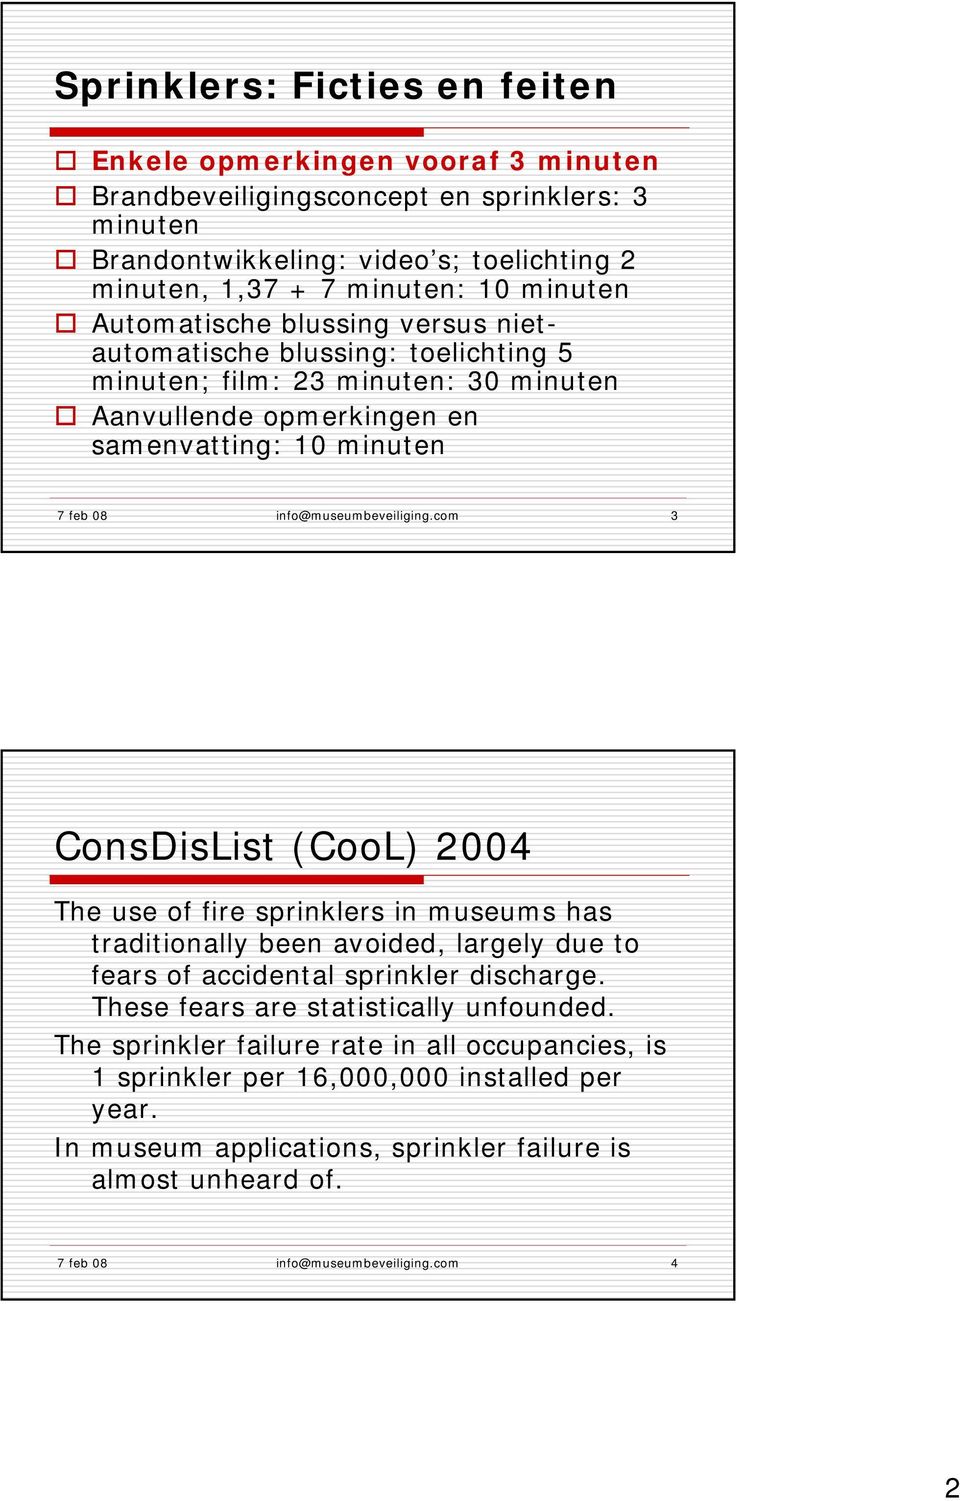 com 3 ConsDisList (CooL) 2004 The use of fire sprinklers in museums has traditionally been avoided, largely due to fears of accidental sprinkler discharge. These fears are statistically unfounded.